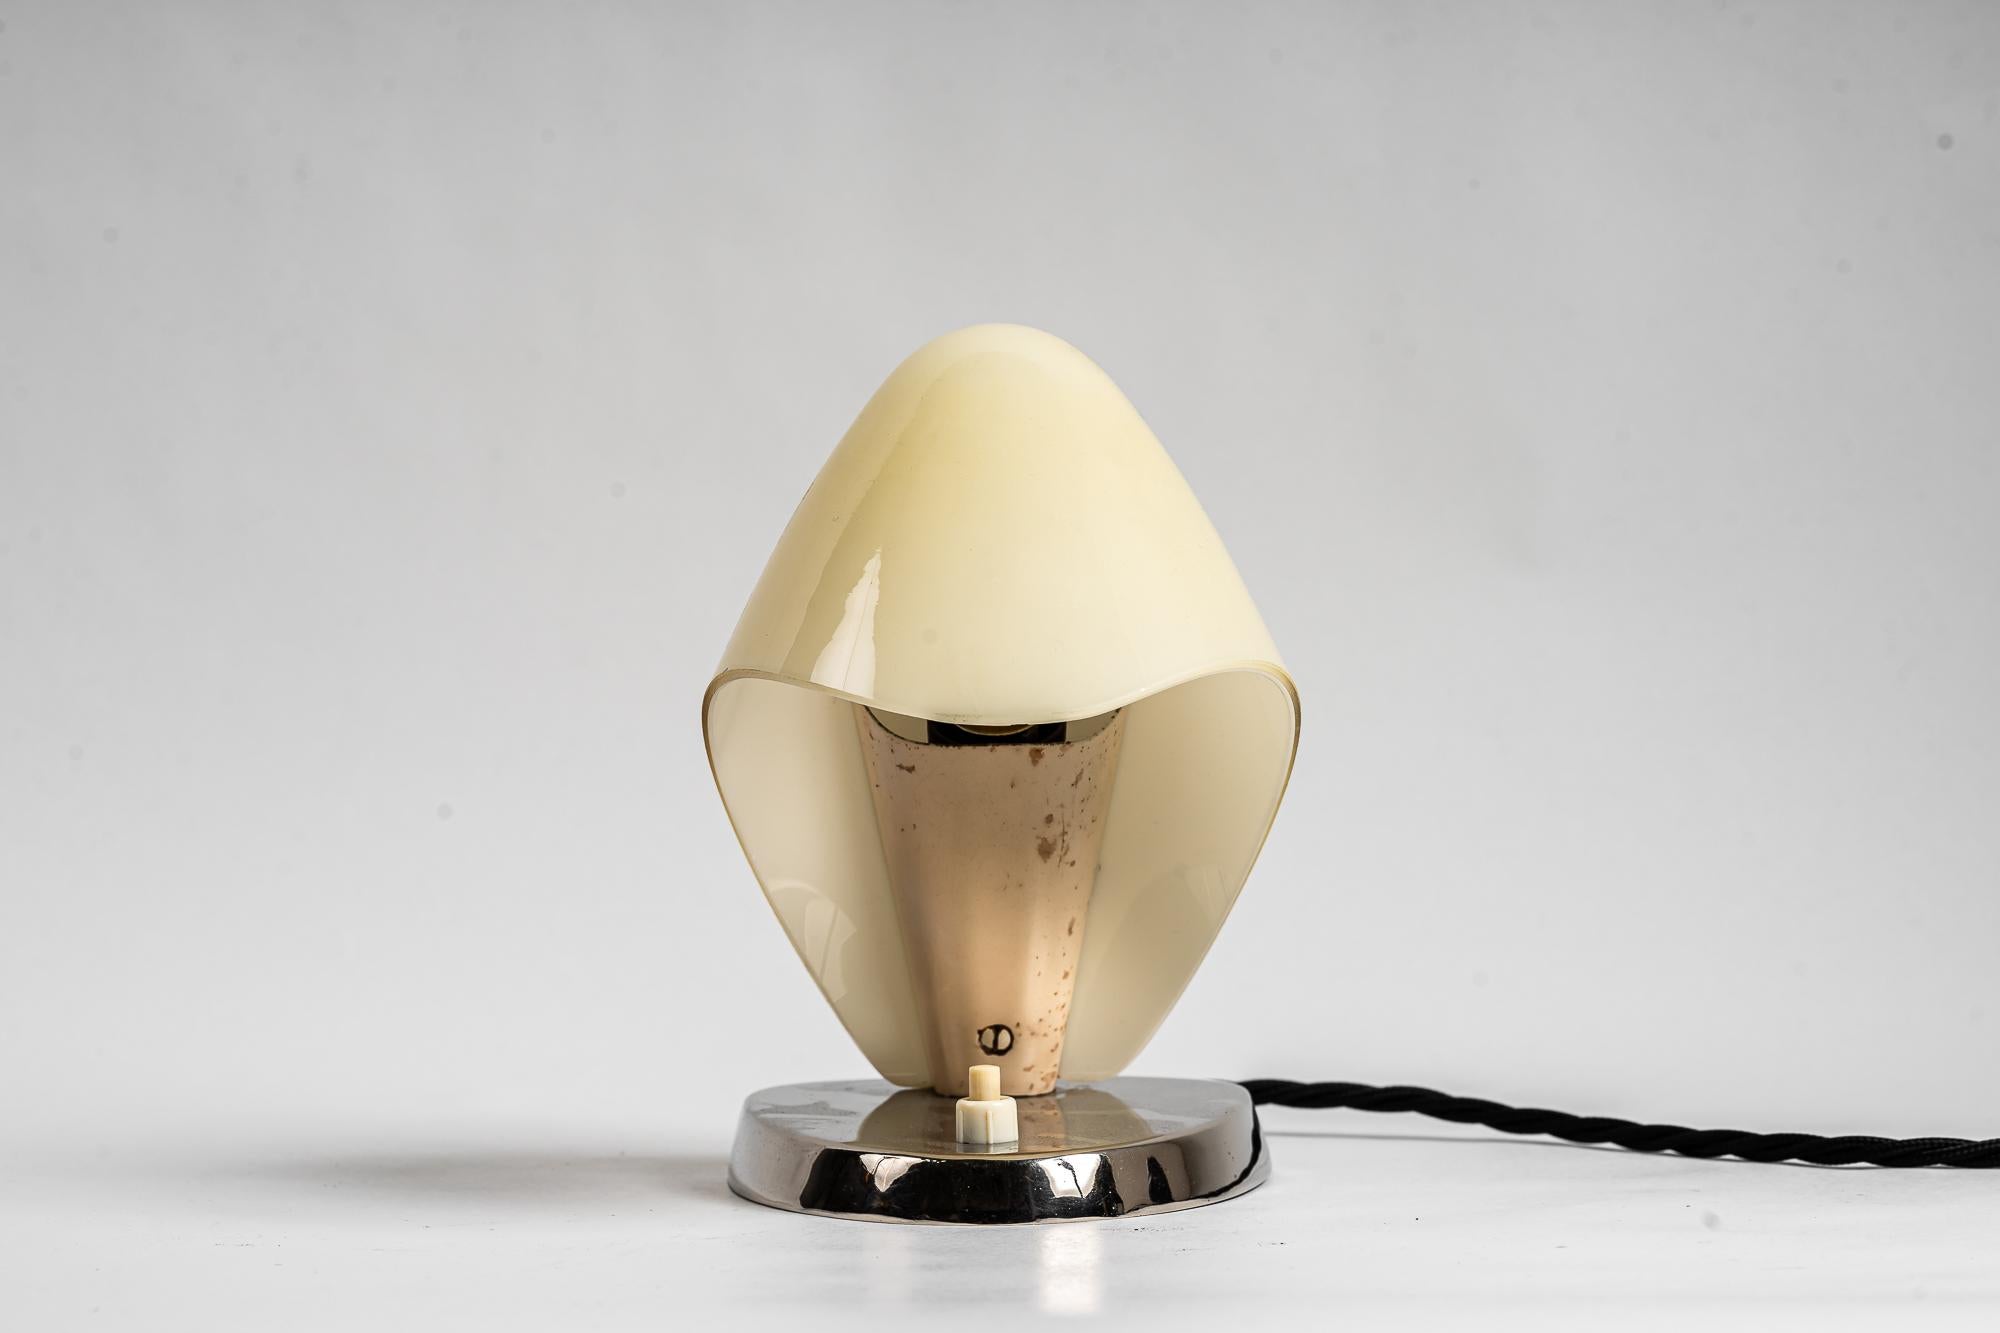 Plated Rupert Nikoll Table Lamp with Original Glass Shade, Vienna, Around 1960s For Sale